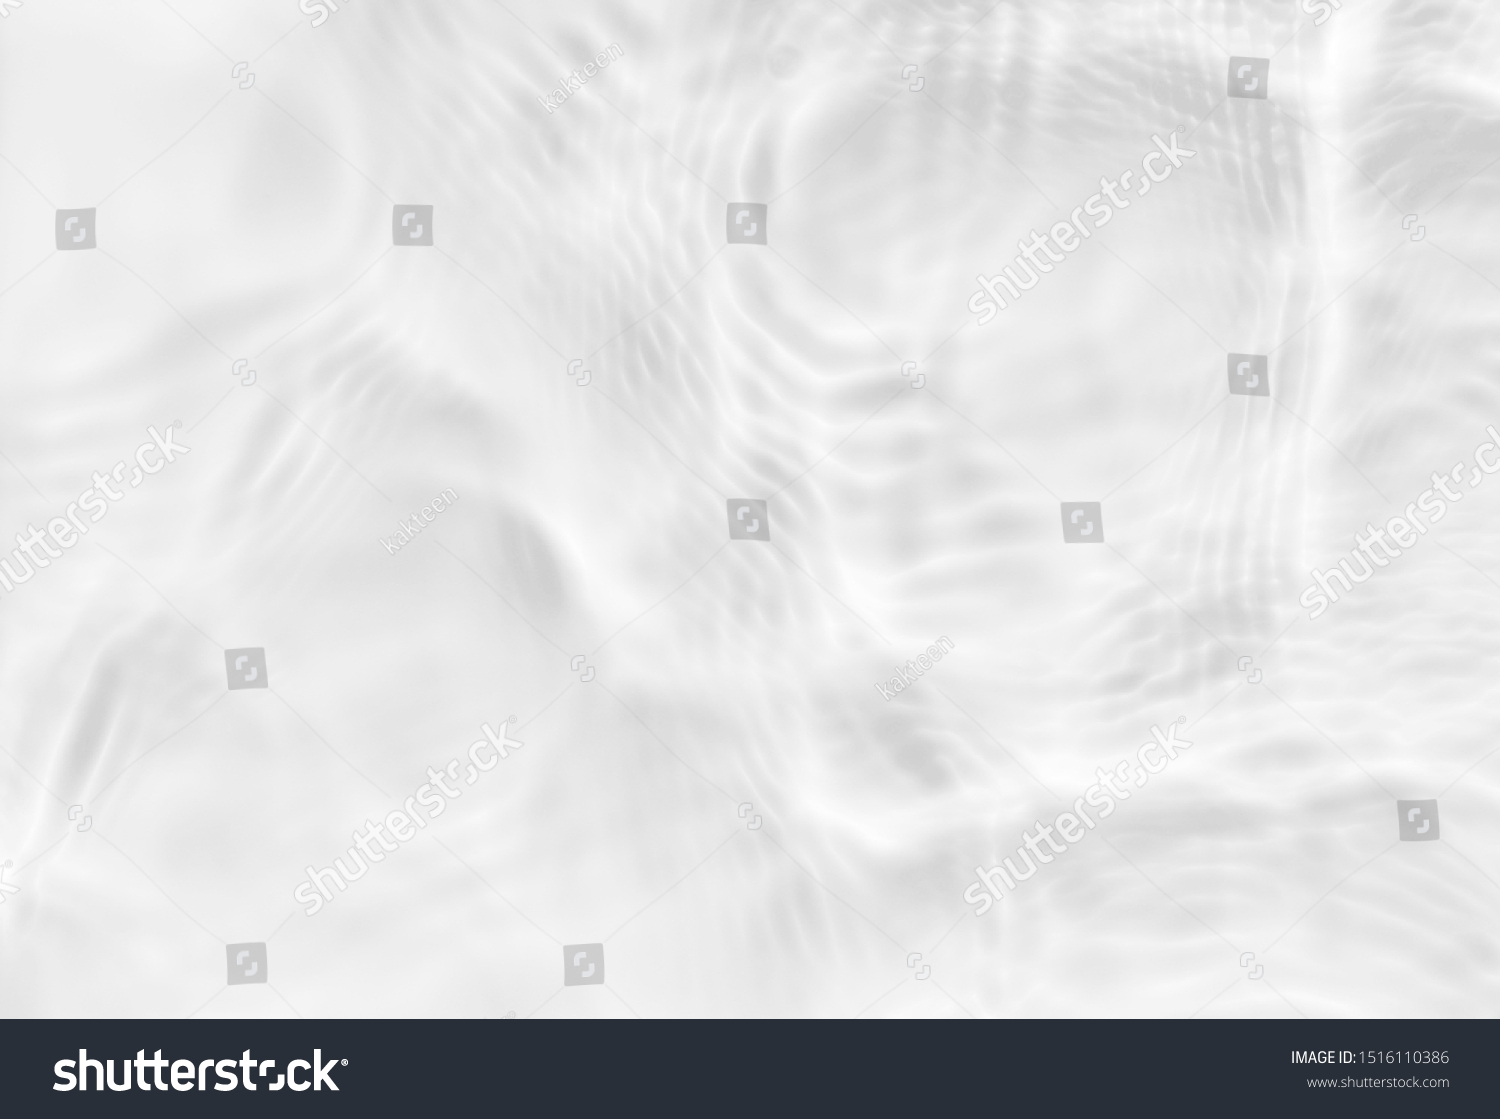 White texture of light-shadow pattern of sunlight reflection from rippled water surface. Beautiful natural pattern with 3D feeling. White-grey water waves marbling. #1516110386